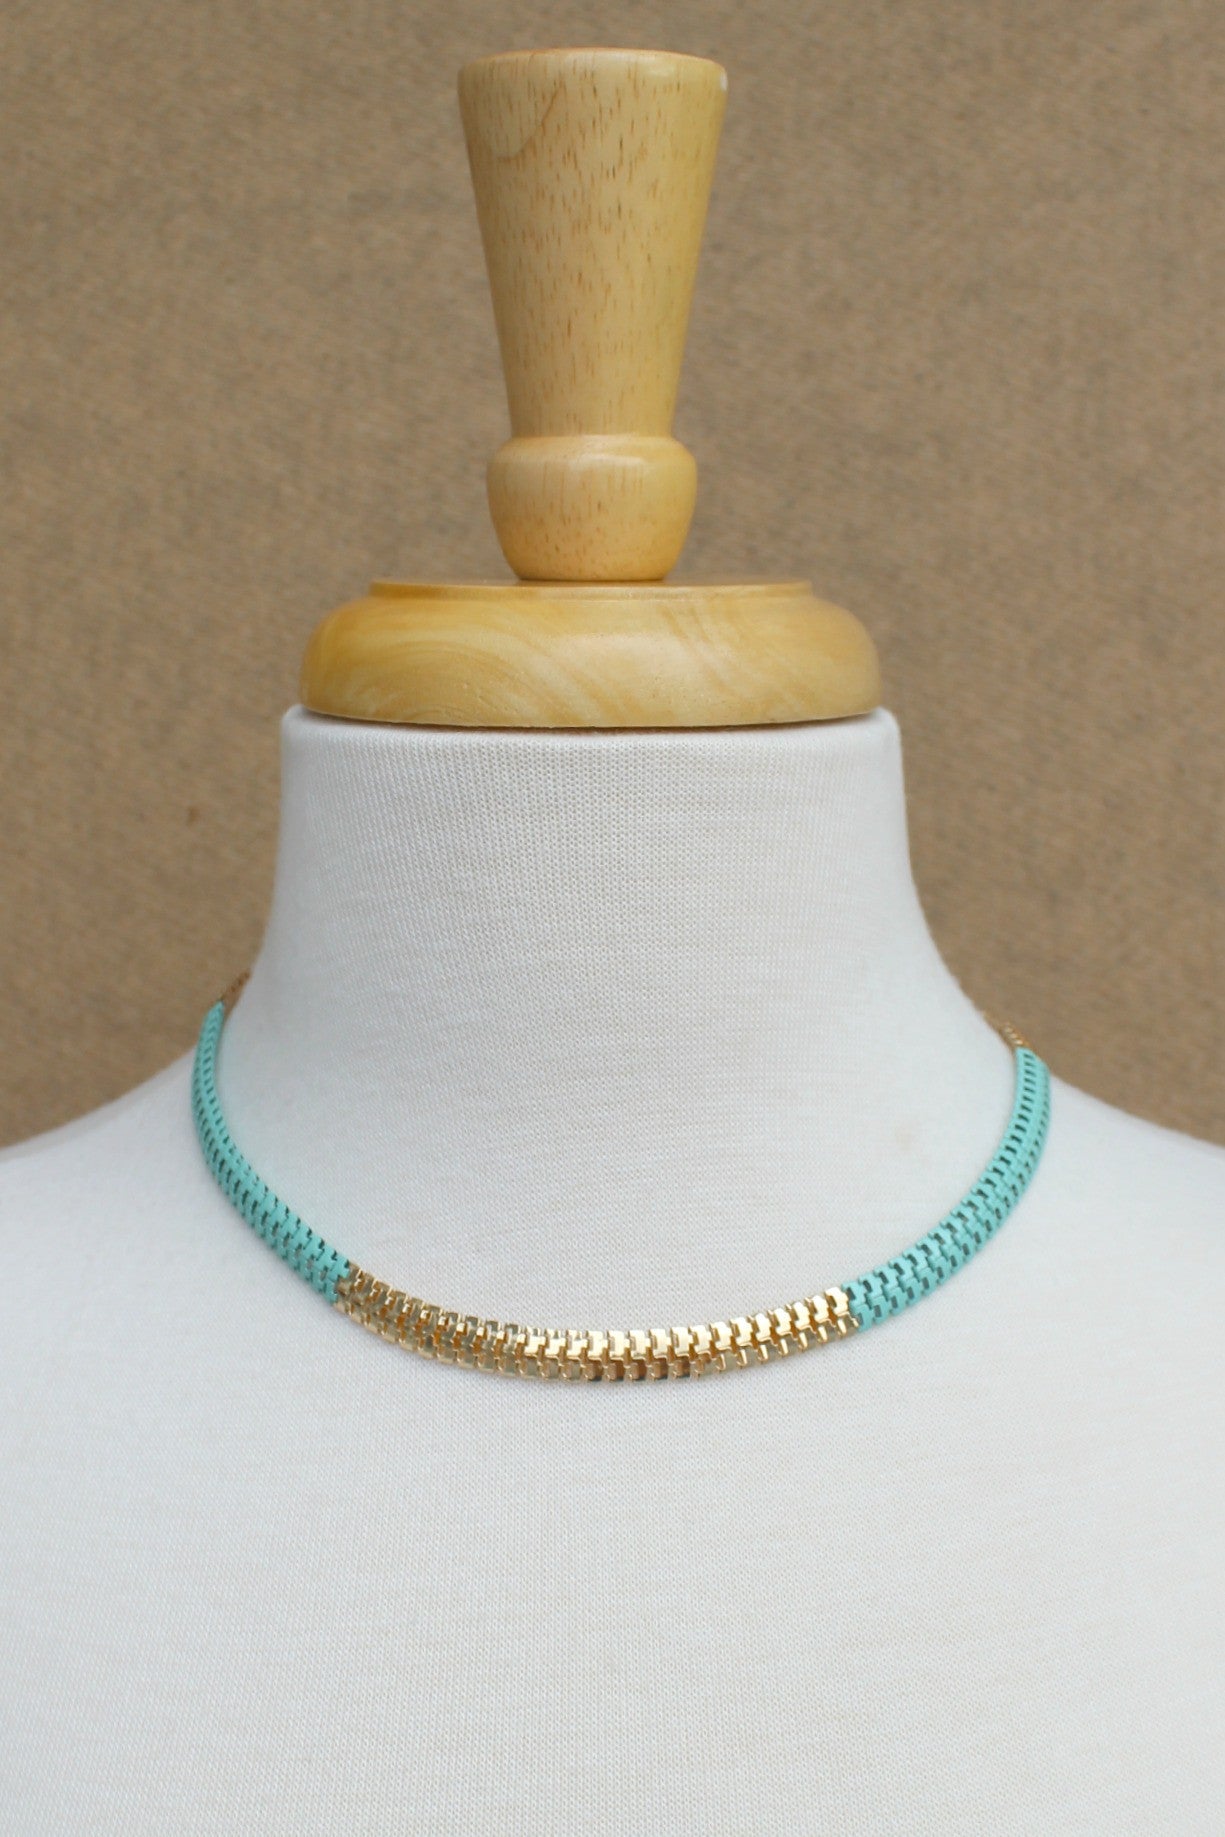 Colorblock Serpentine Necklace, Turquoise